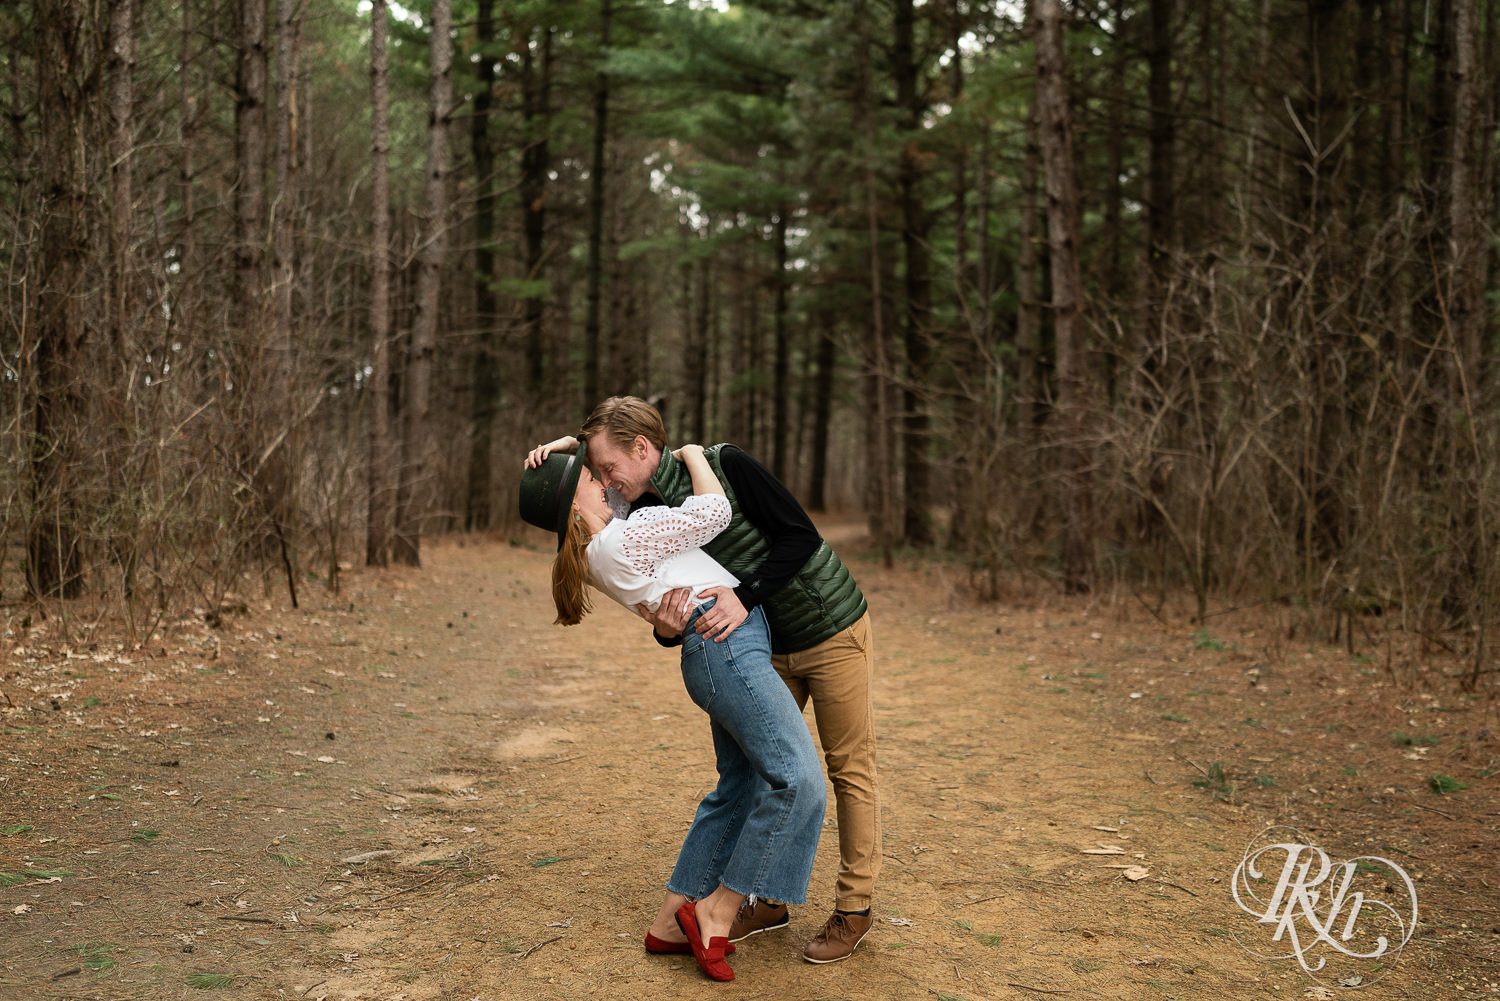 Man and woman dressed in jeans and a kiss in the woods in Eagan, Minnesota.